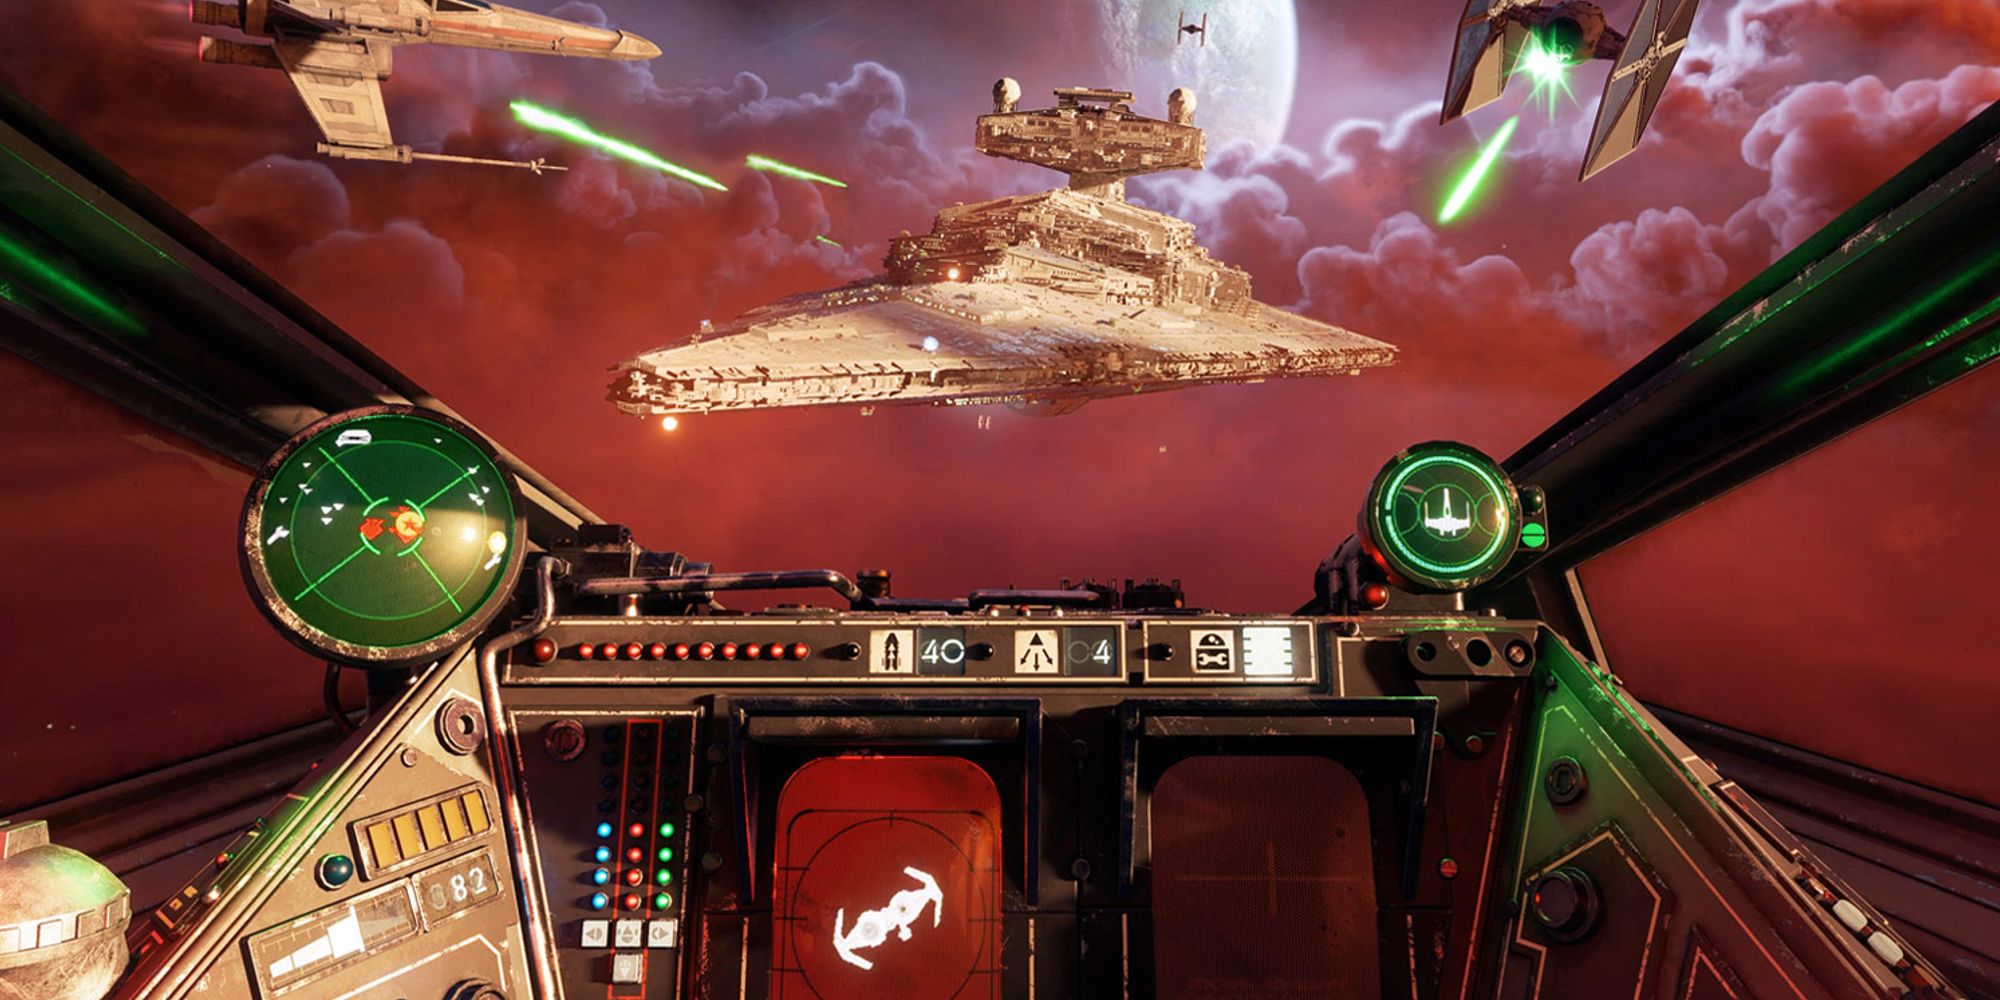 Pilot watches a battle between an X-Wing and Tie Fighter, while a Star Destroyer flies behind in Star Wars Squadron